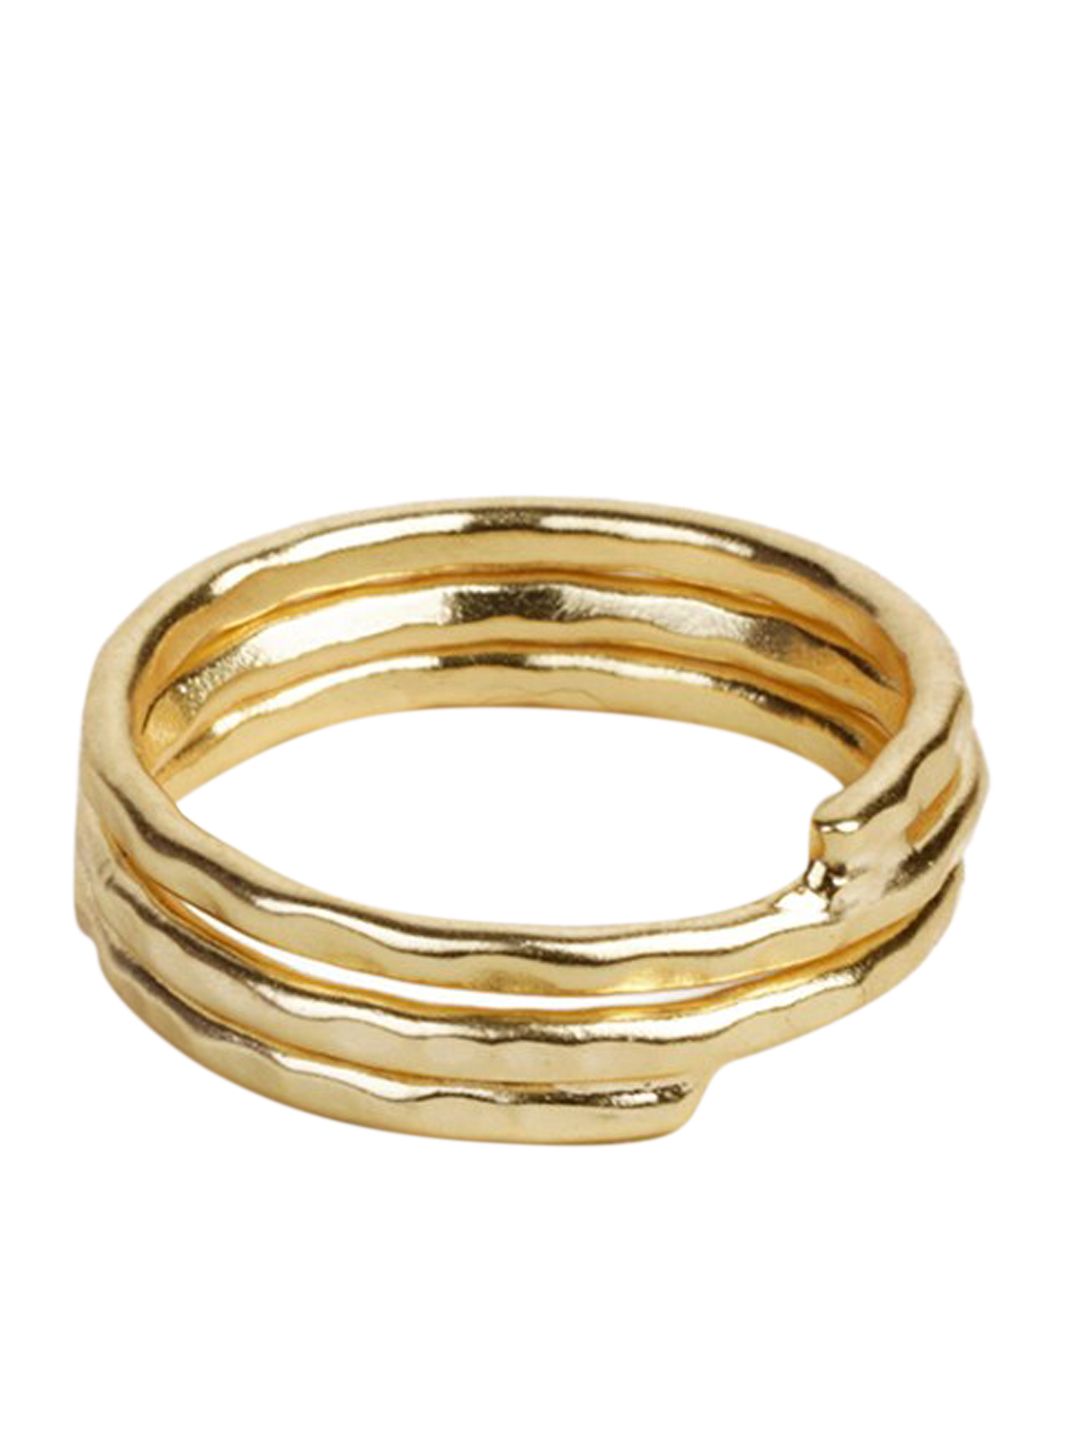 STILSKII Gold Plated Statement Finger Ring Price in India